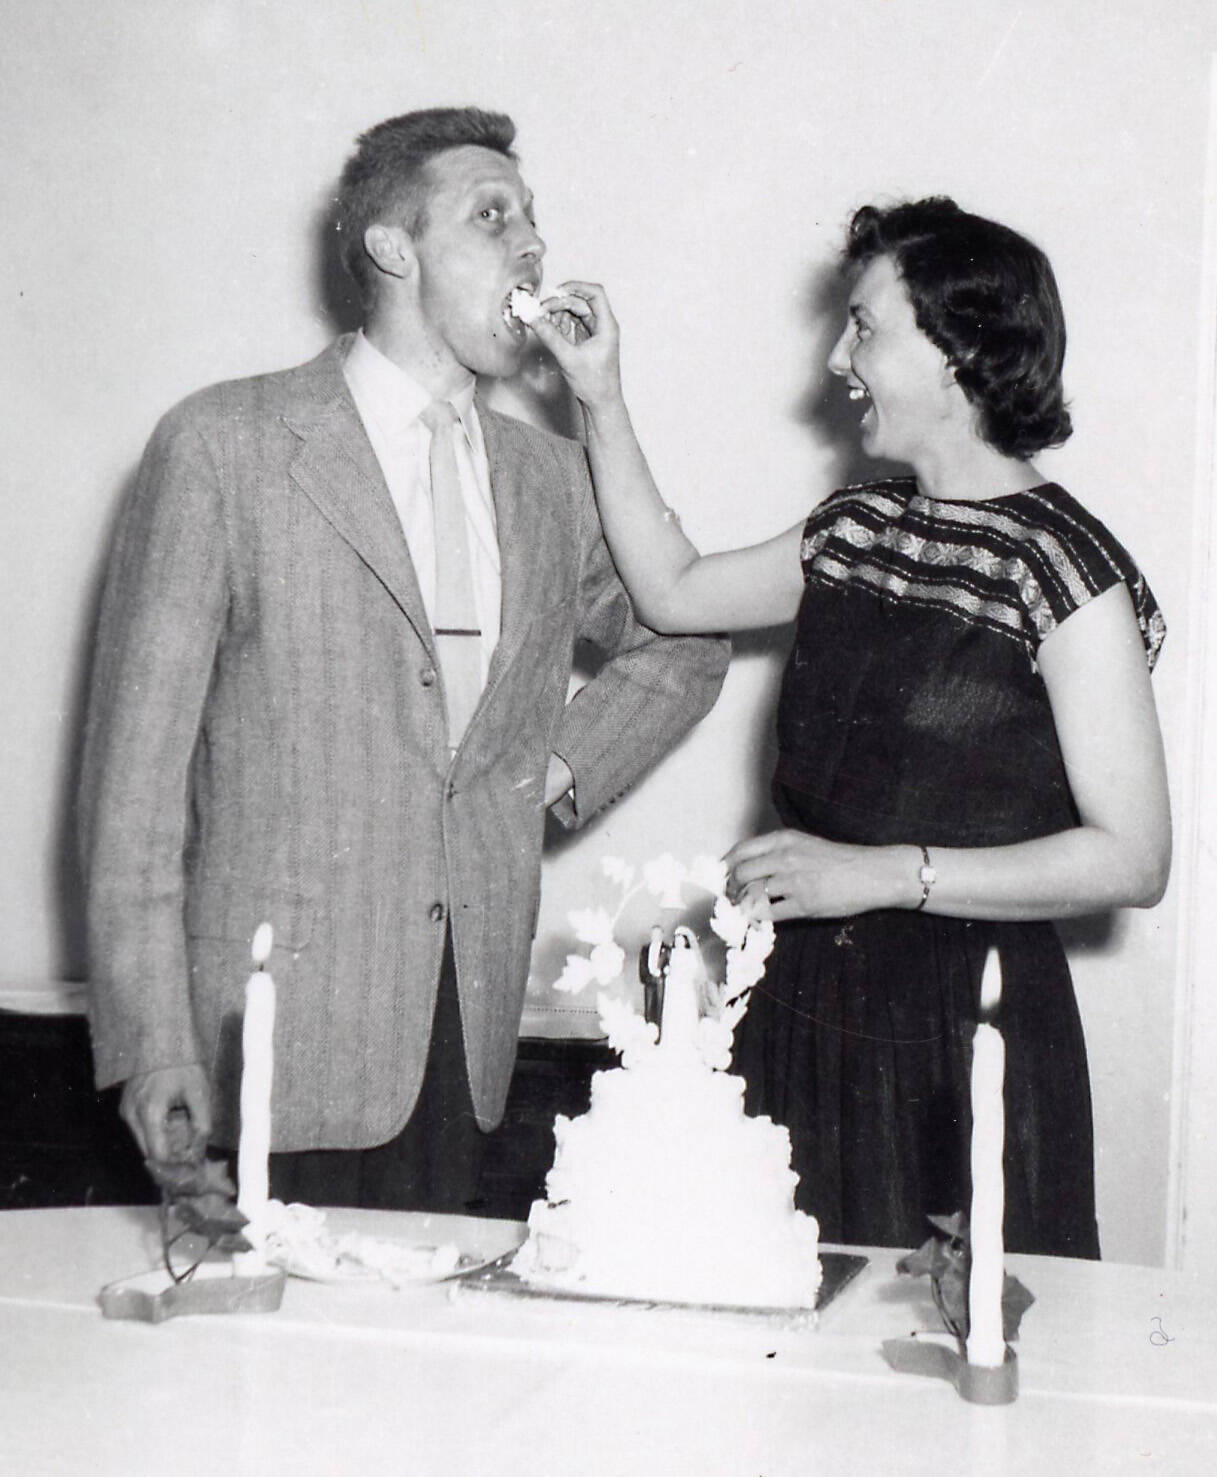 Newly married John and Grace Fenger have a good-natured exchange of wedding cake. They were married in Kodiak during one of the M.S. Hygiene’s ports of call. (Photo courtesy of the Fenger Family Collection)